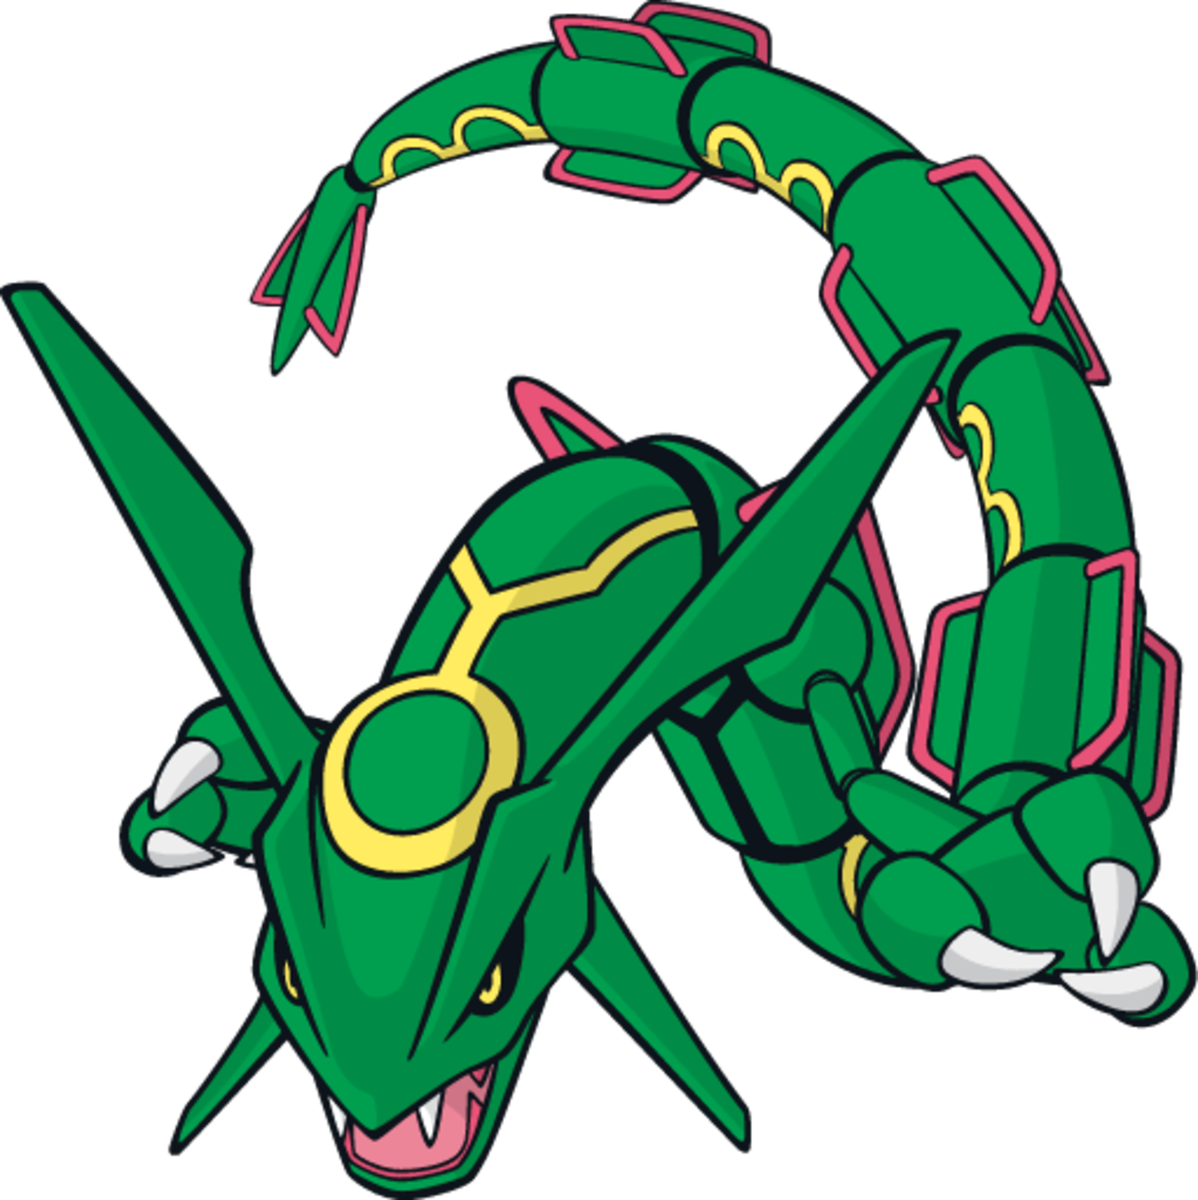 Rayquaza: formed from the minerals in the ozone layer and mediator between Kyogre and Groudon.